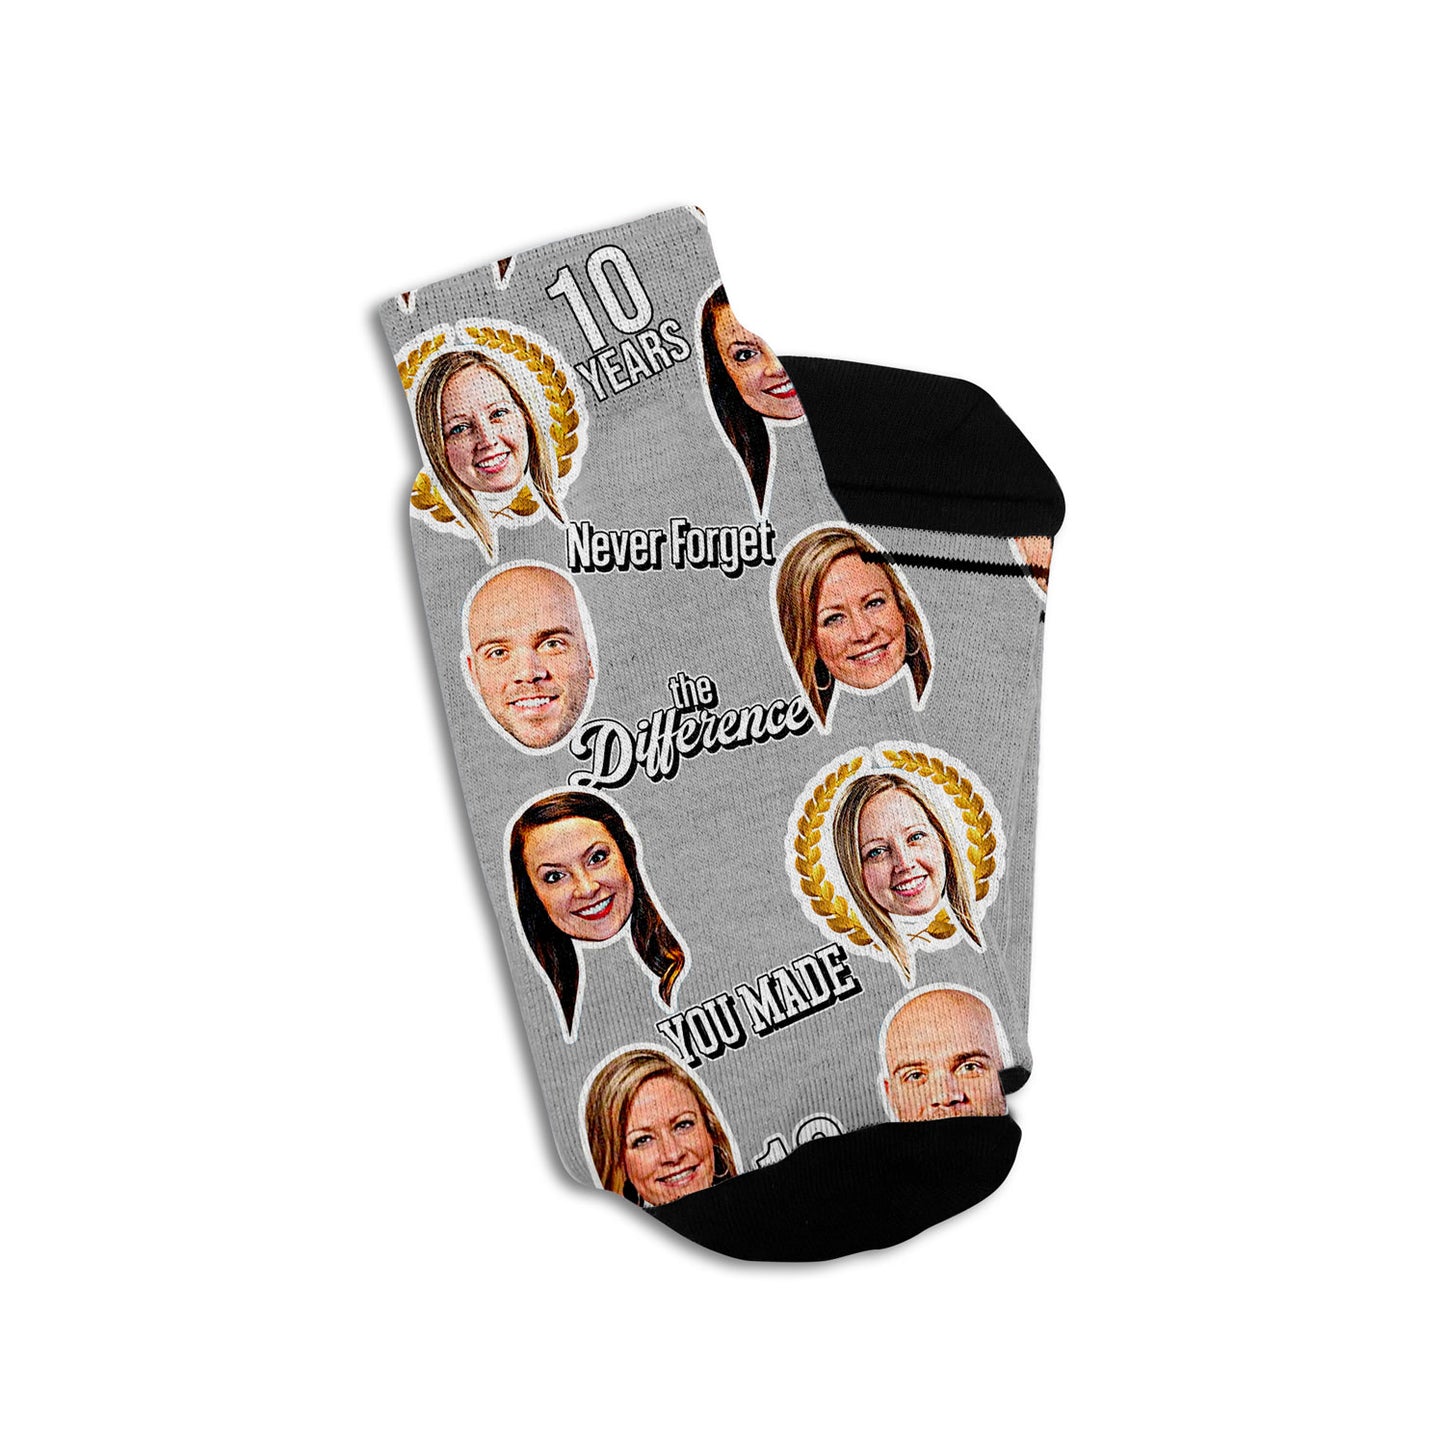 employee anniversary personalized socks with coworkers faces on grey